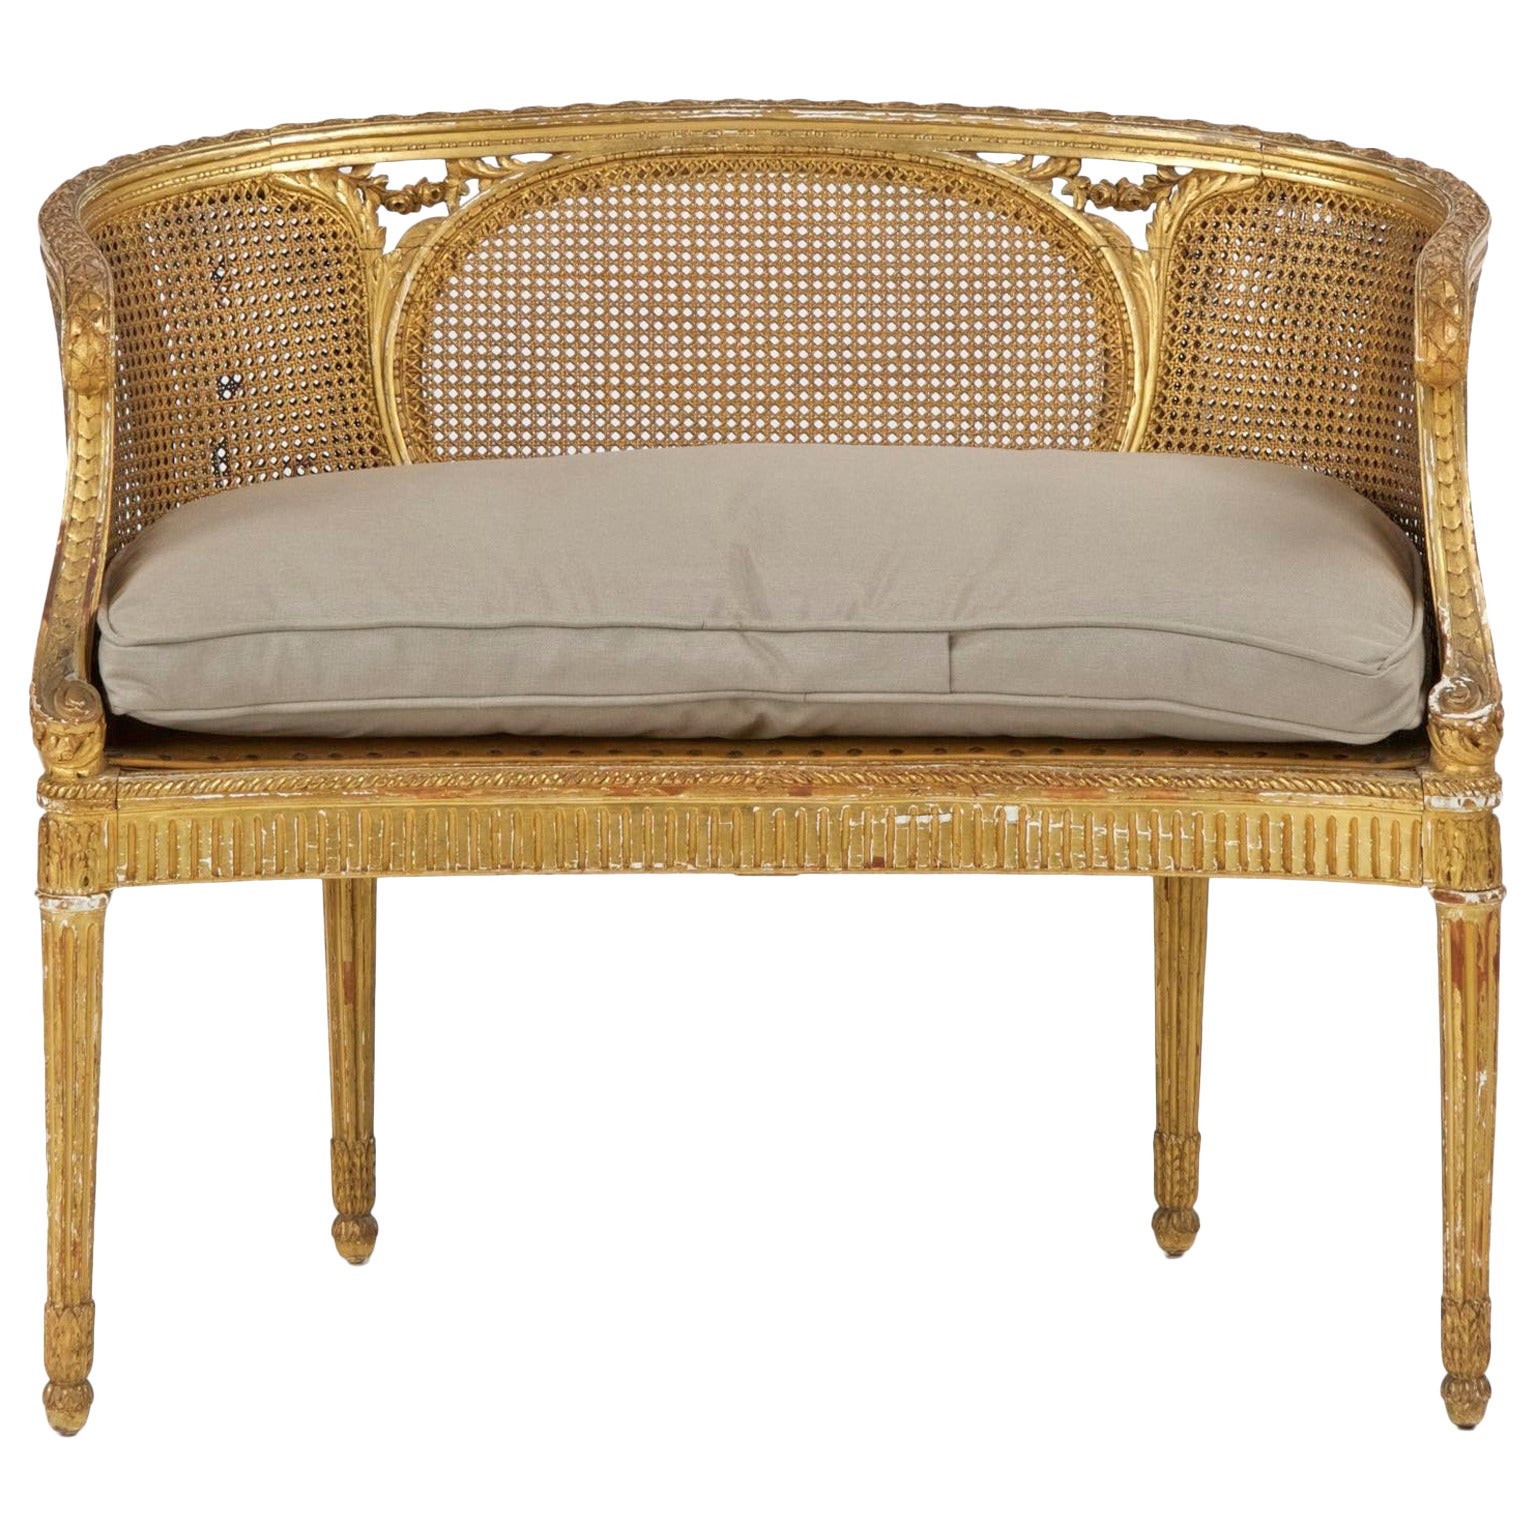 Small French Louis XVI Style Giltwood Upholstered Settee or Marquise c. 1900